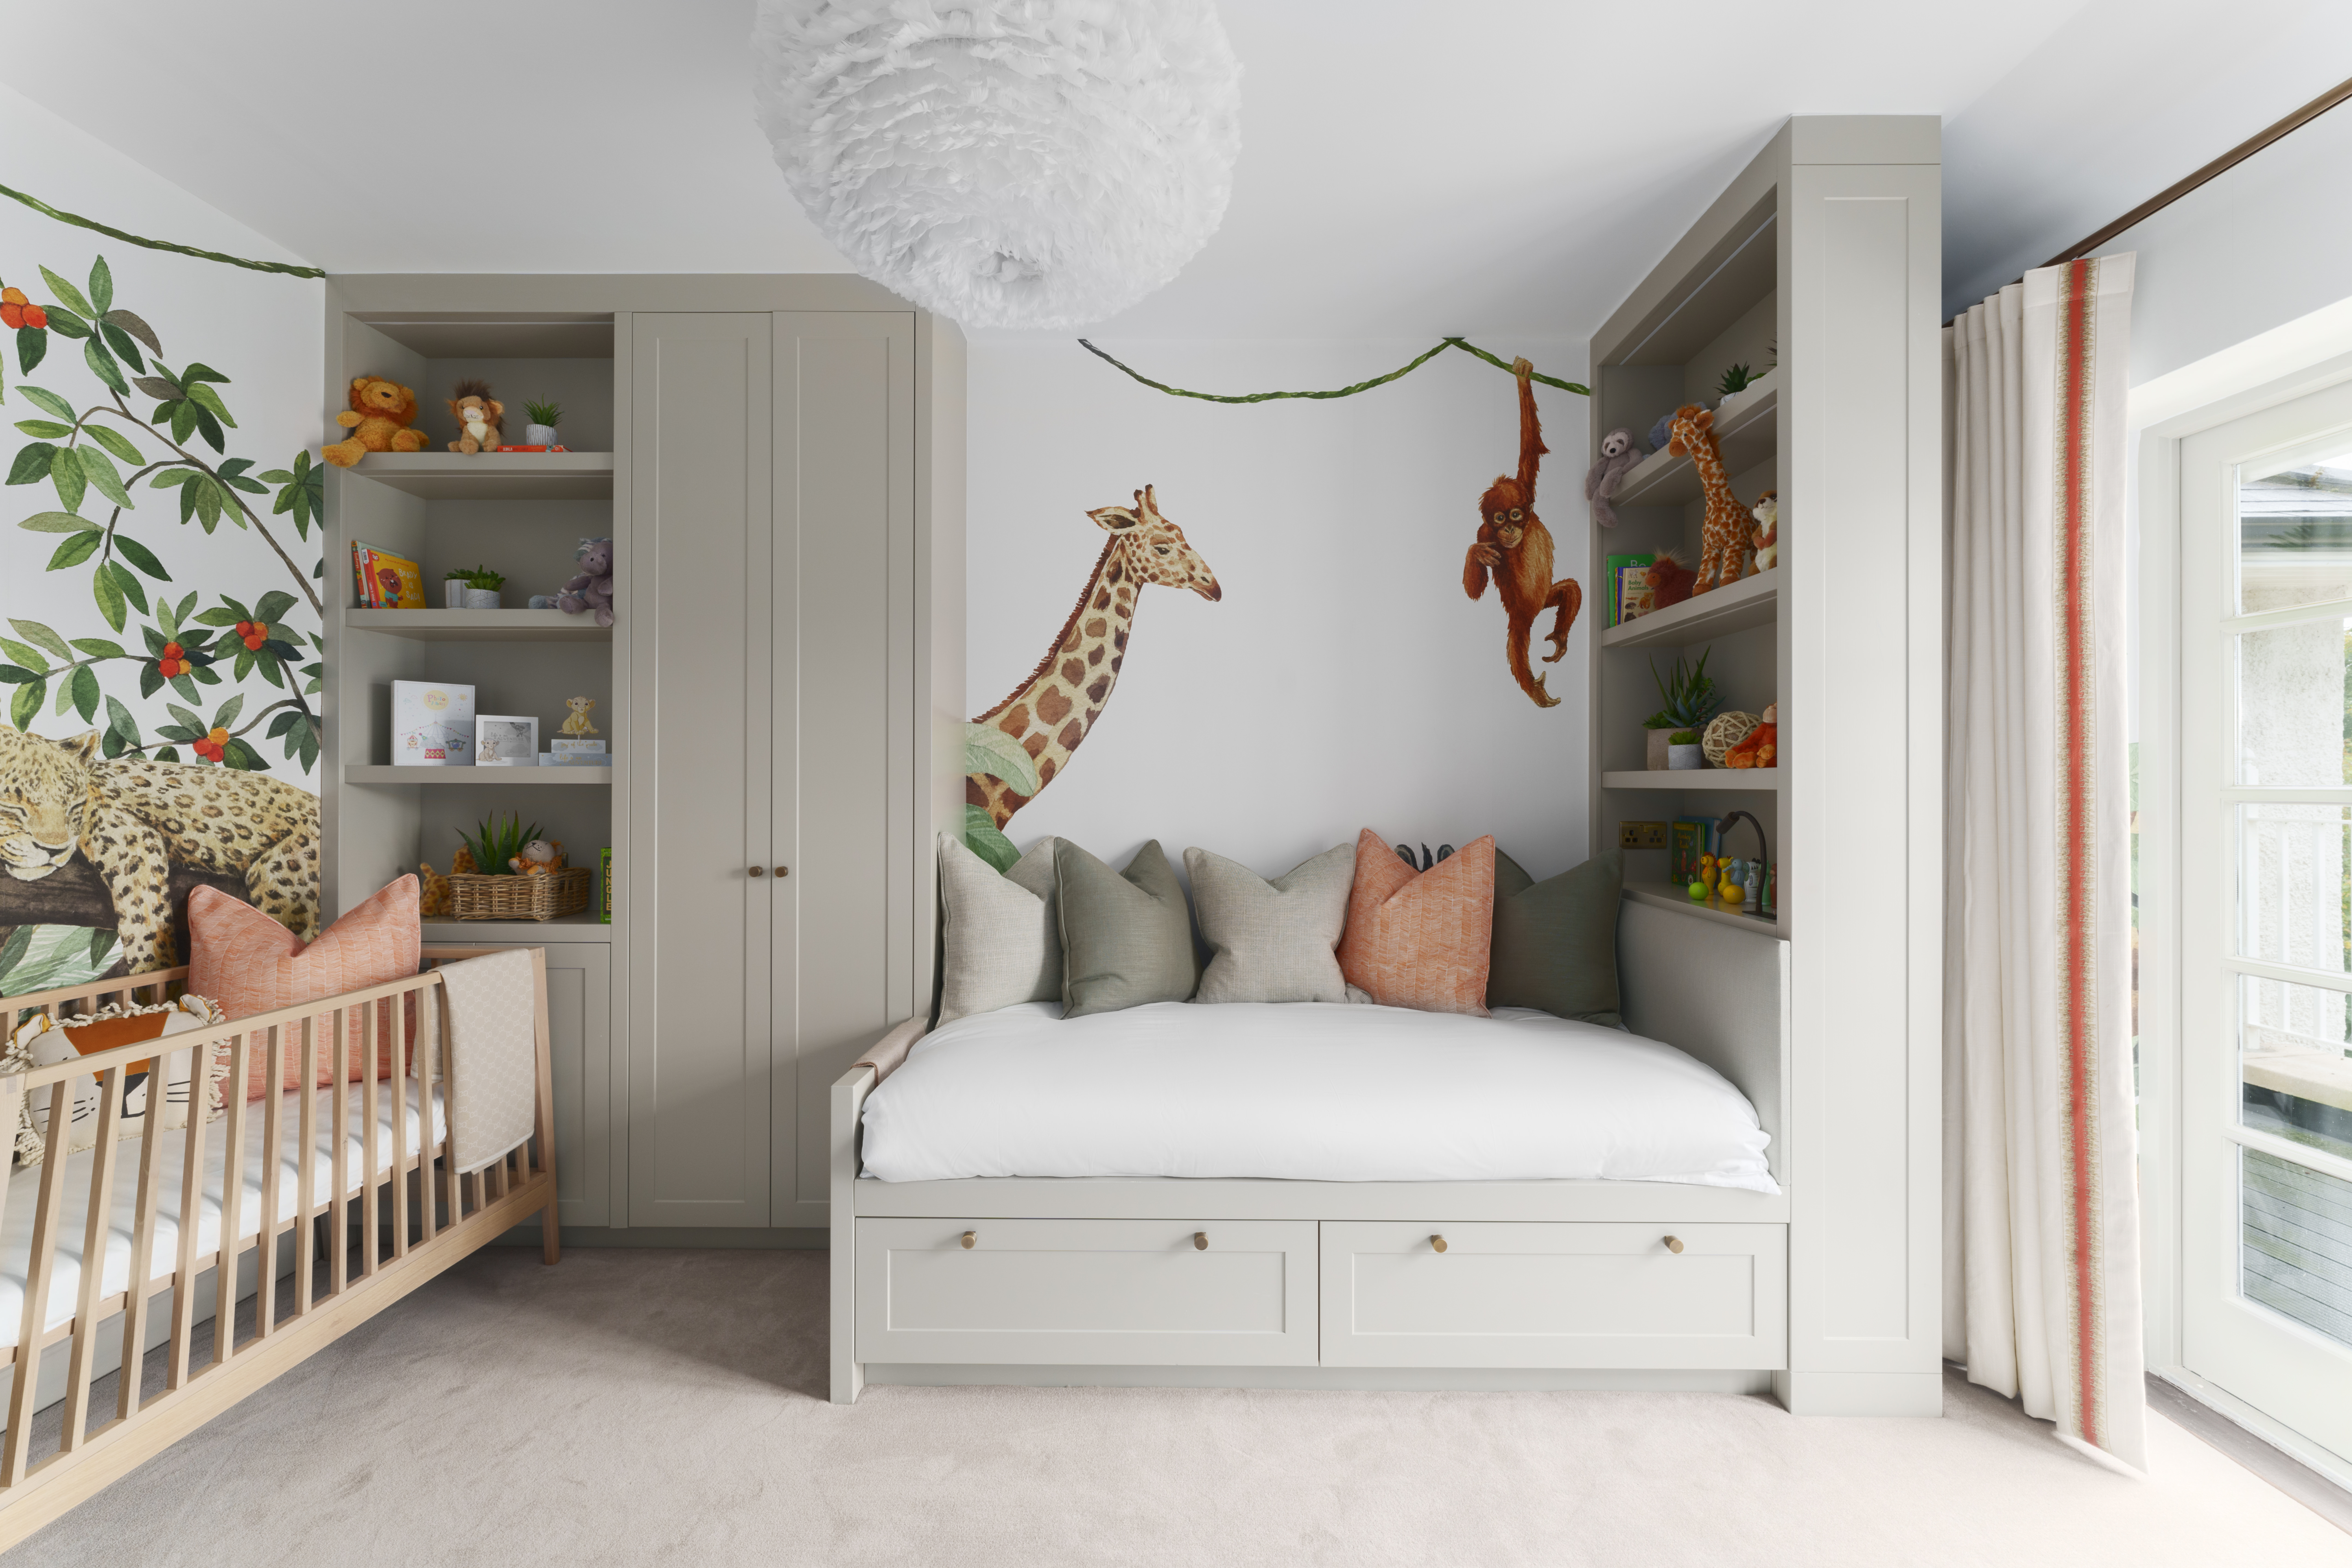 The Best Nursery Essentials For A Cozy, Stylish Space - Forbes Vetted